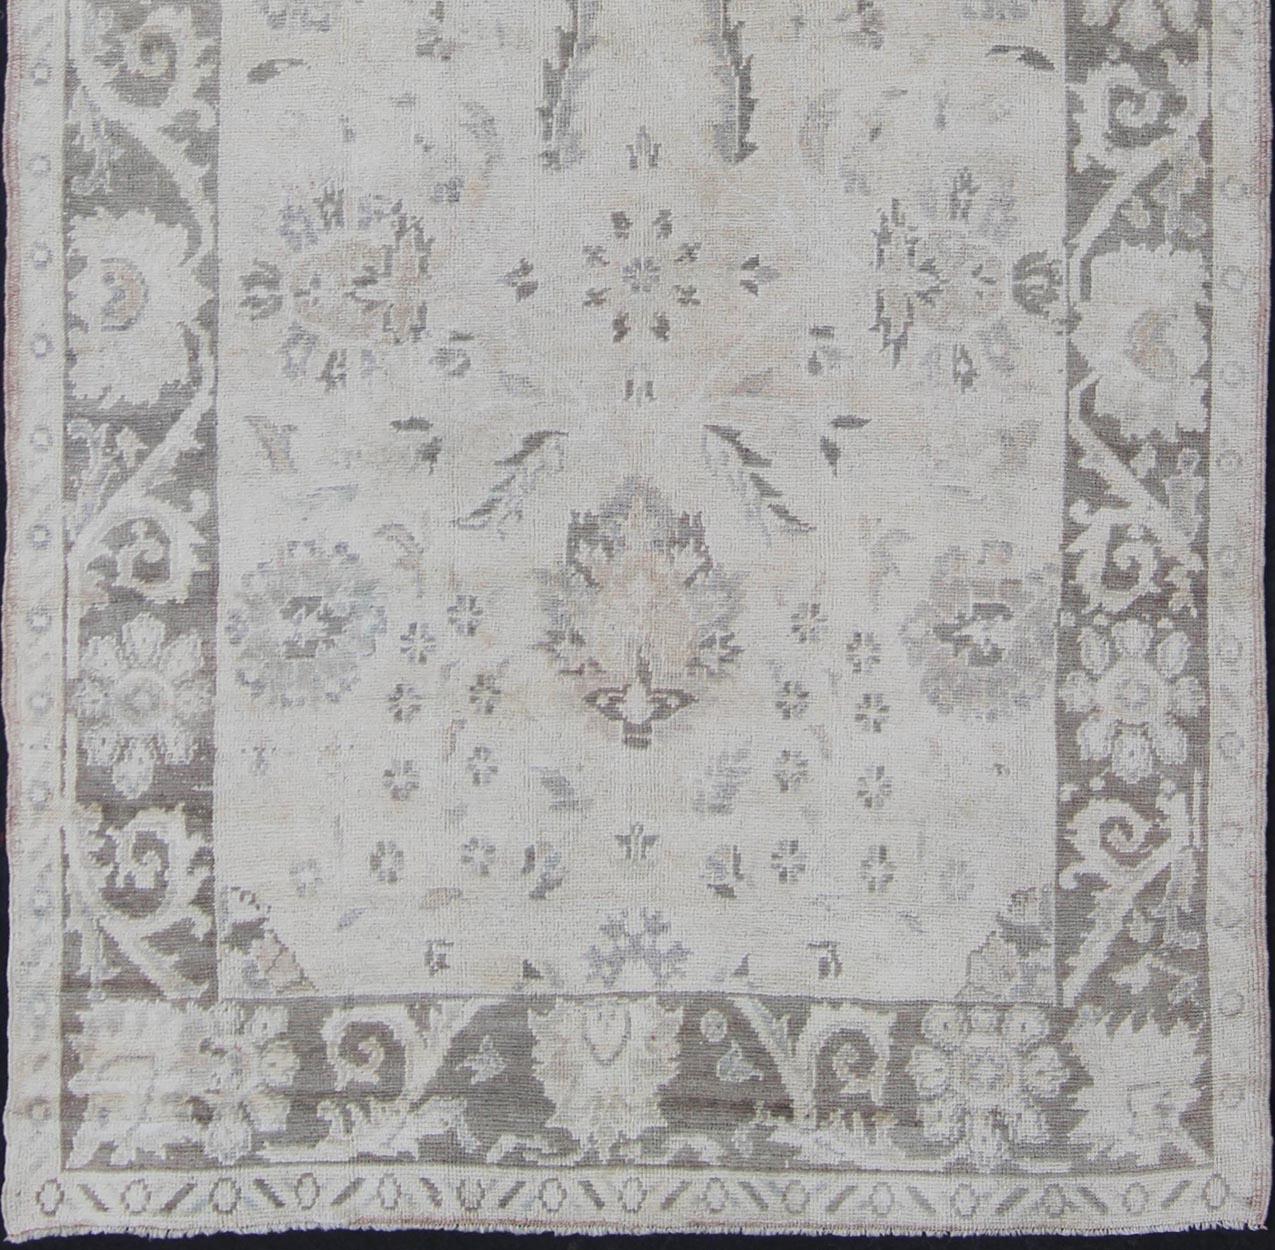 Handwoven in mid-20th century Turkey, this vintage Oushak carpet is built on traditional designs and features an all-over botanical pattern in its central field. Rendered in gray and cream tones, this carpet beautifully communicates the finer